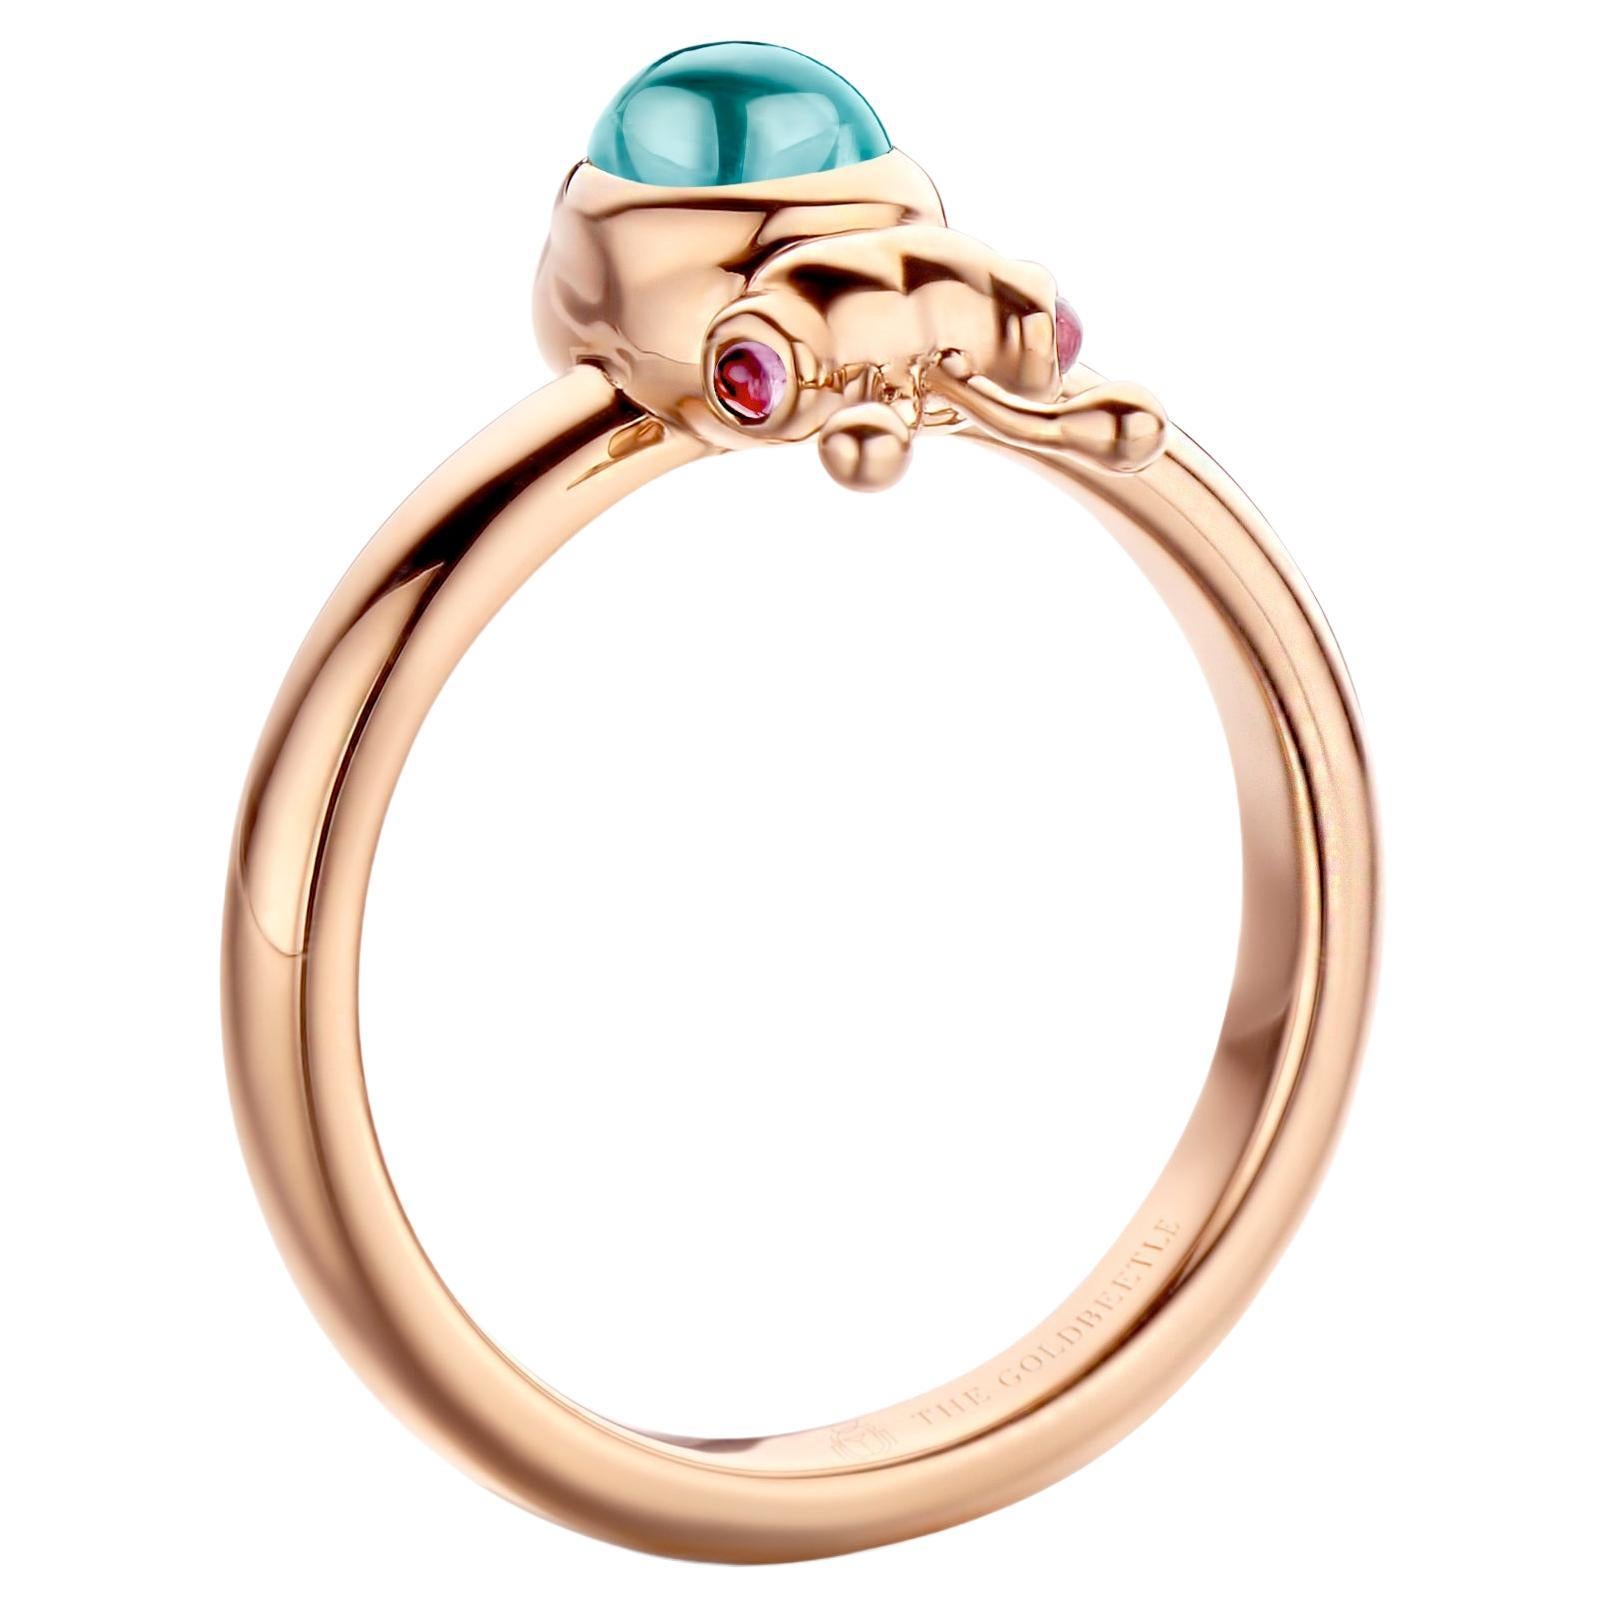 18 karat rose gold Lilou ring set with one natural aquamarine pear-shaped cabochon and two natural pink tourmalines in round cabochon cut
Celine Roelens, a goldsmith and gemologist, specializes in unique, fine jewelry, handmade in Belgium and